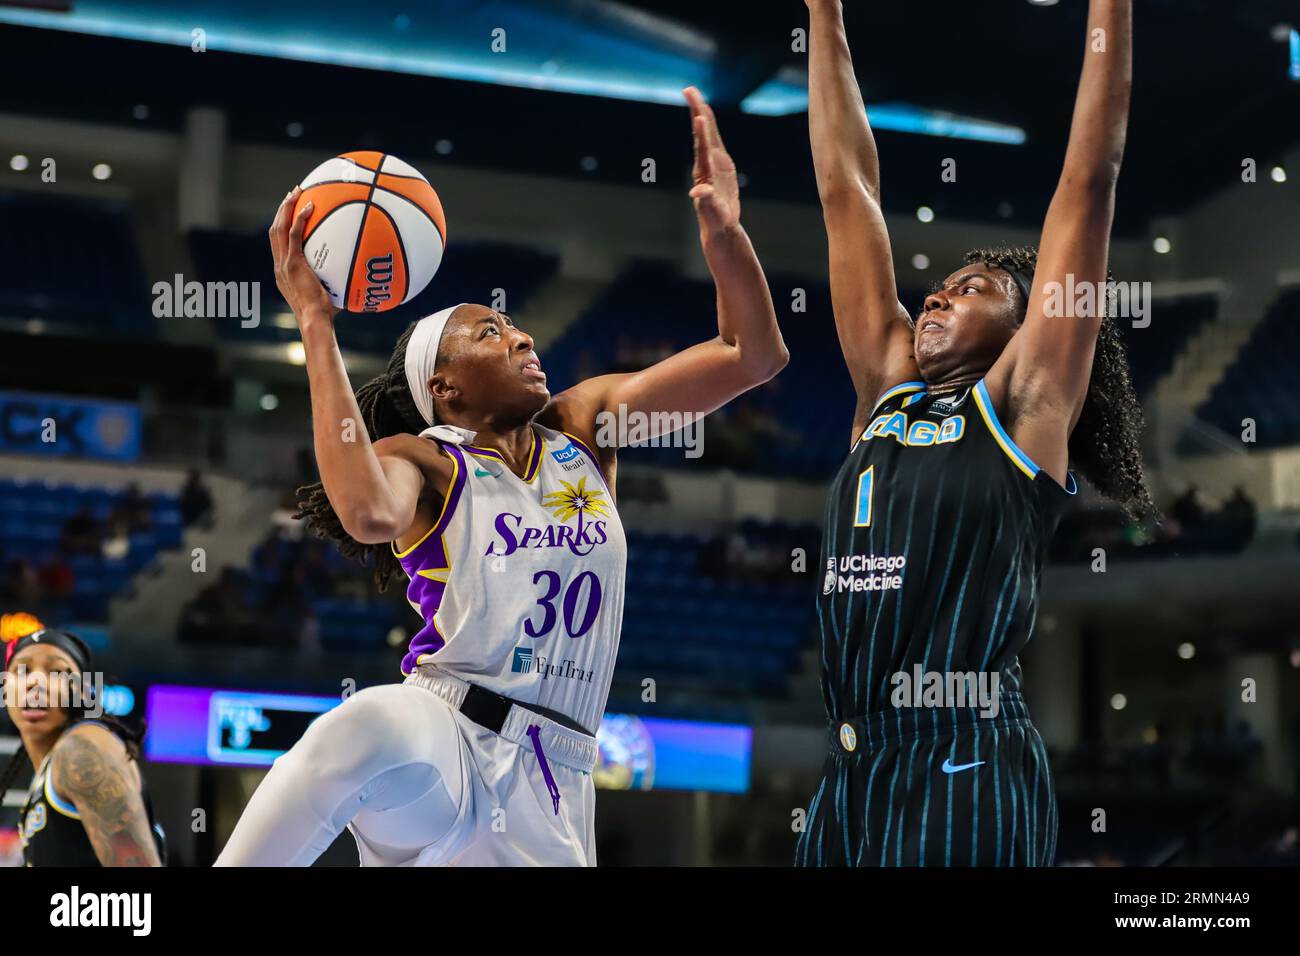 Nneka Ogwumike of the LA Sparks goes up for a layup over Chicago Sky's Elizabeth Williams in Chicago, IL at Wintrust Arena. Stock Photo